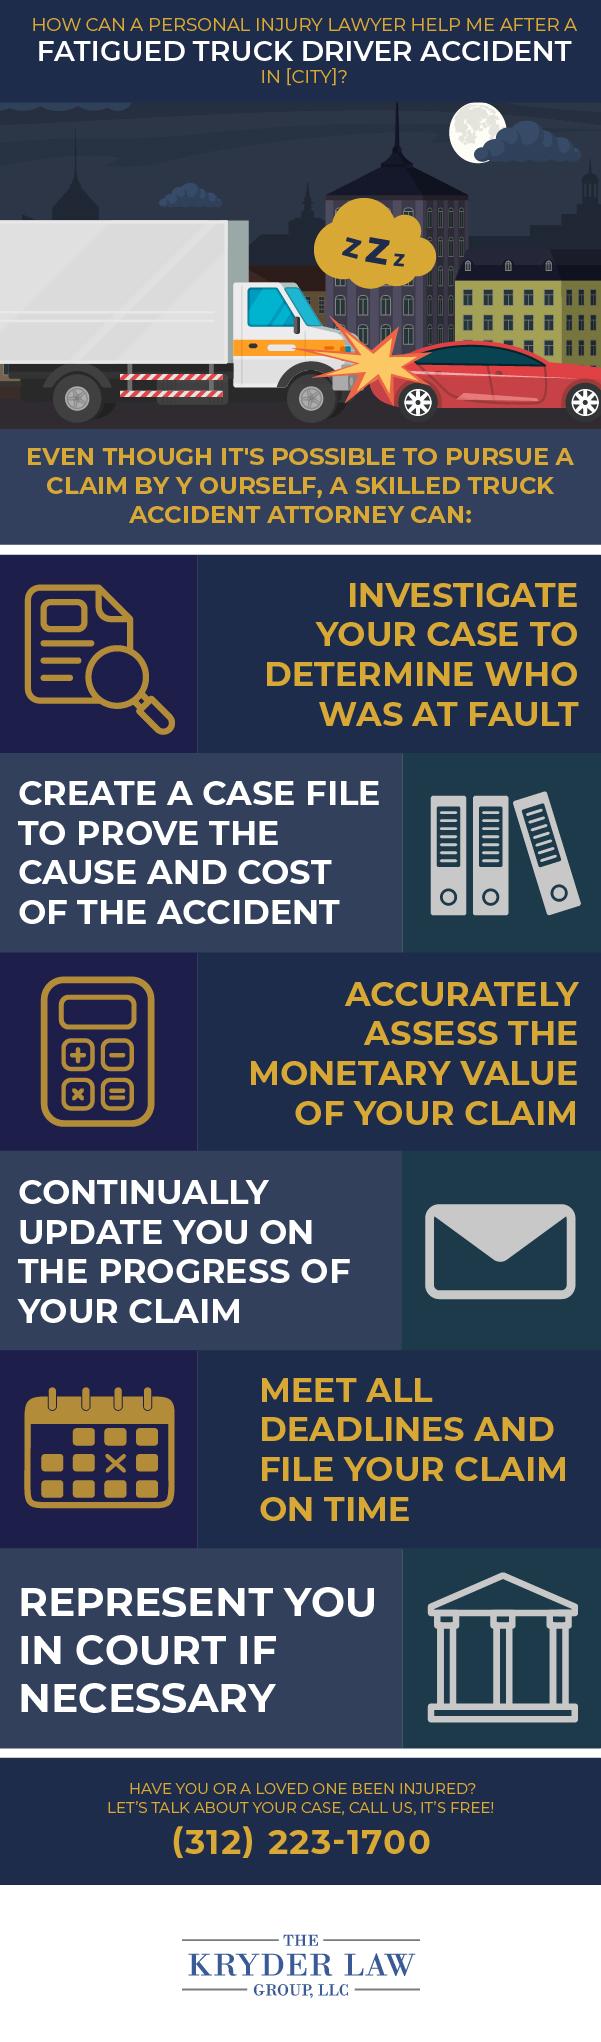 How Can a Personal Injury Lawyer Help Me After a Fatigued Truck Driver Accident in Schaumburg Infographic